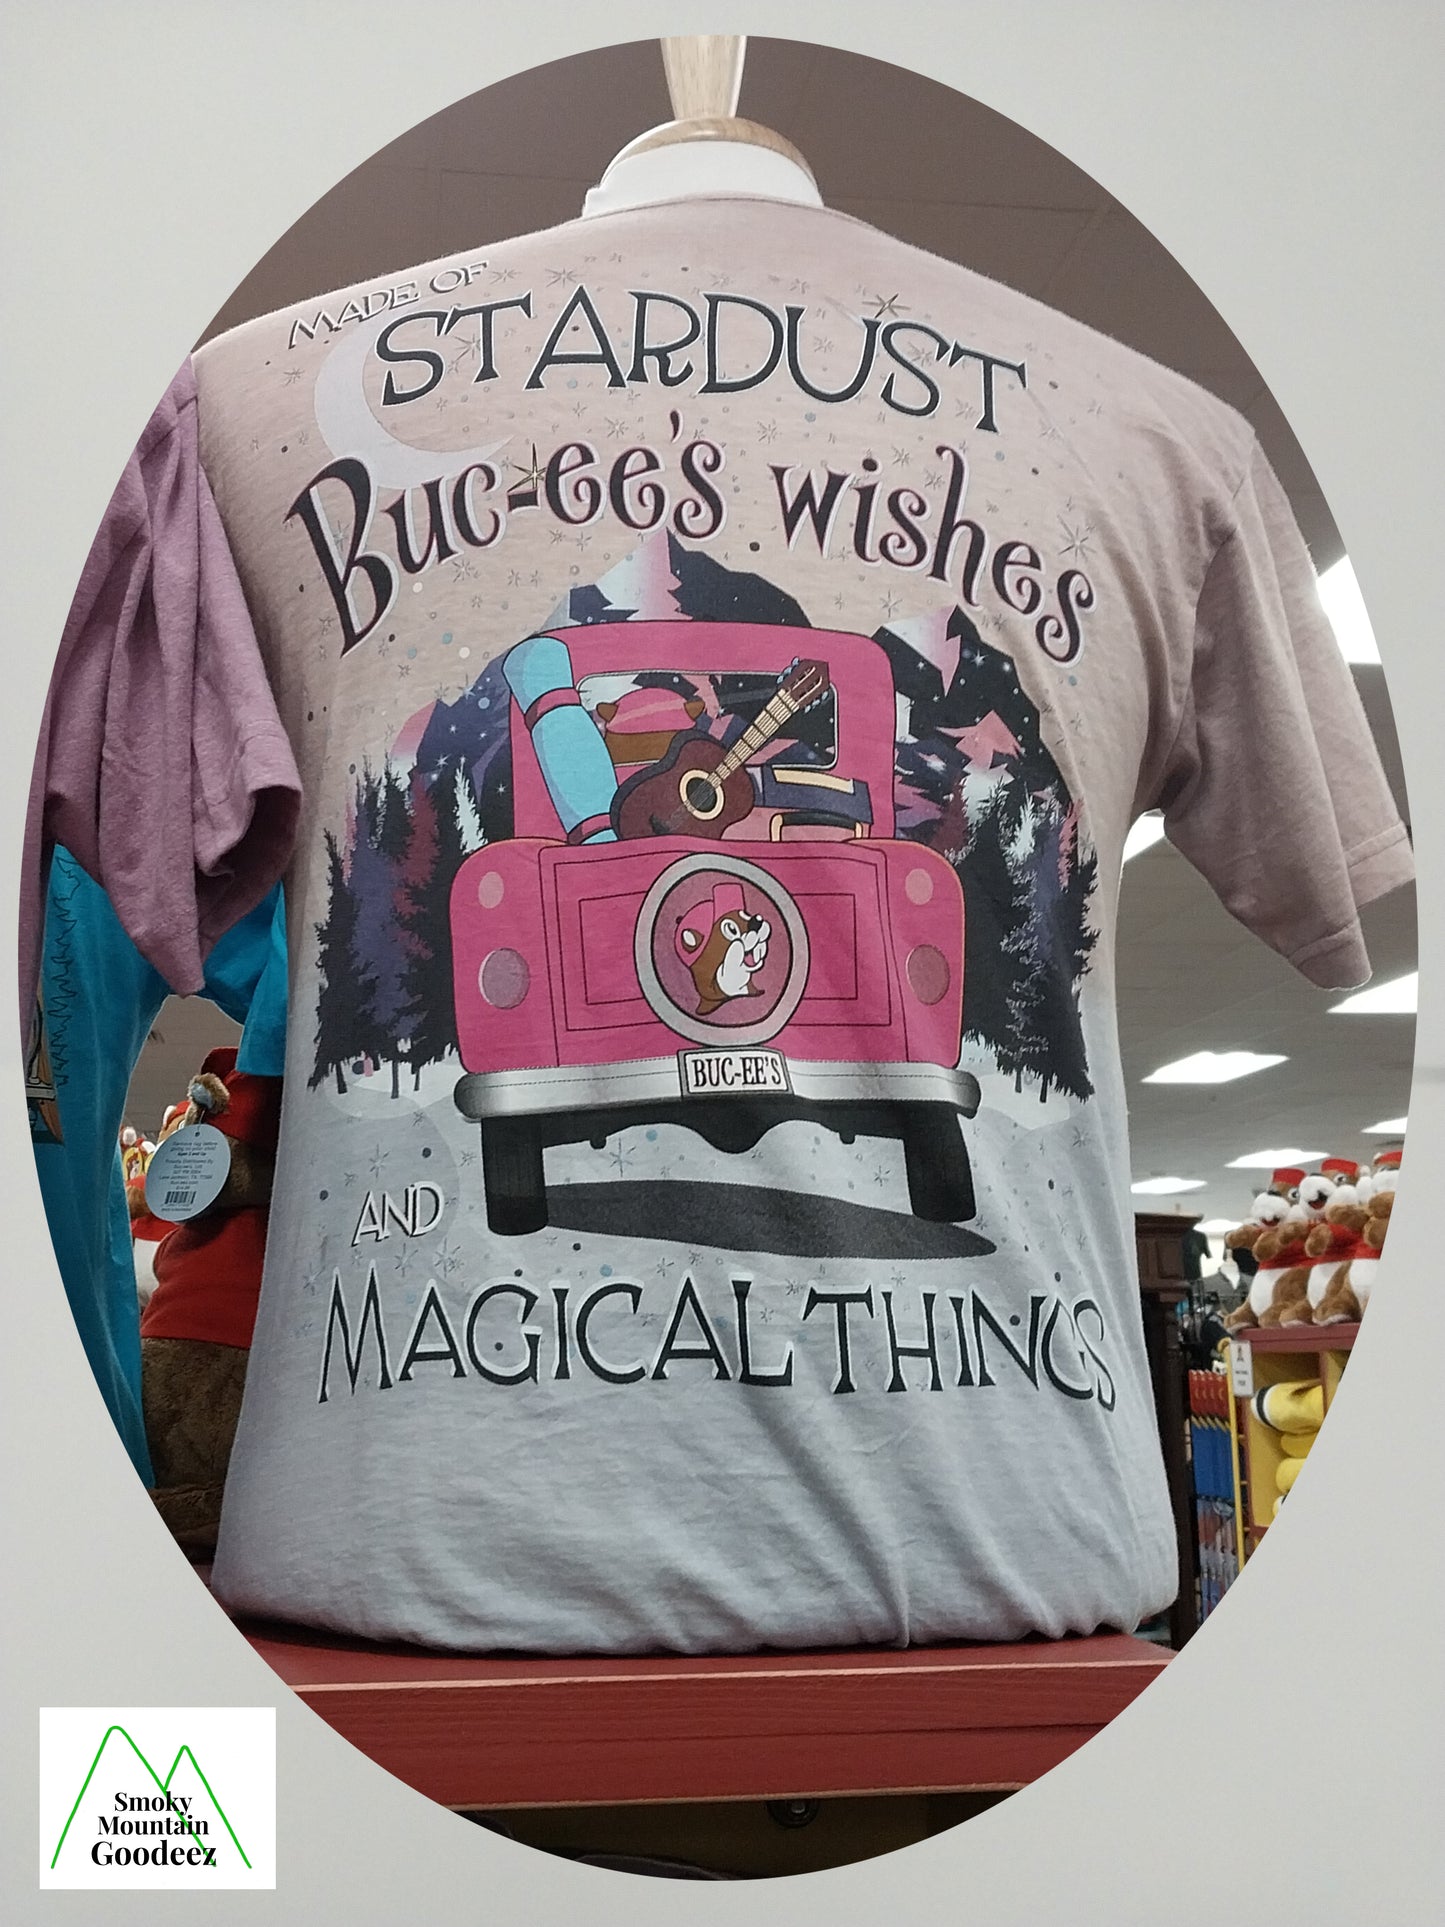 Buc-ee's "Made of Stardust...." T-shirt